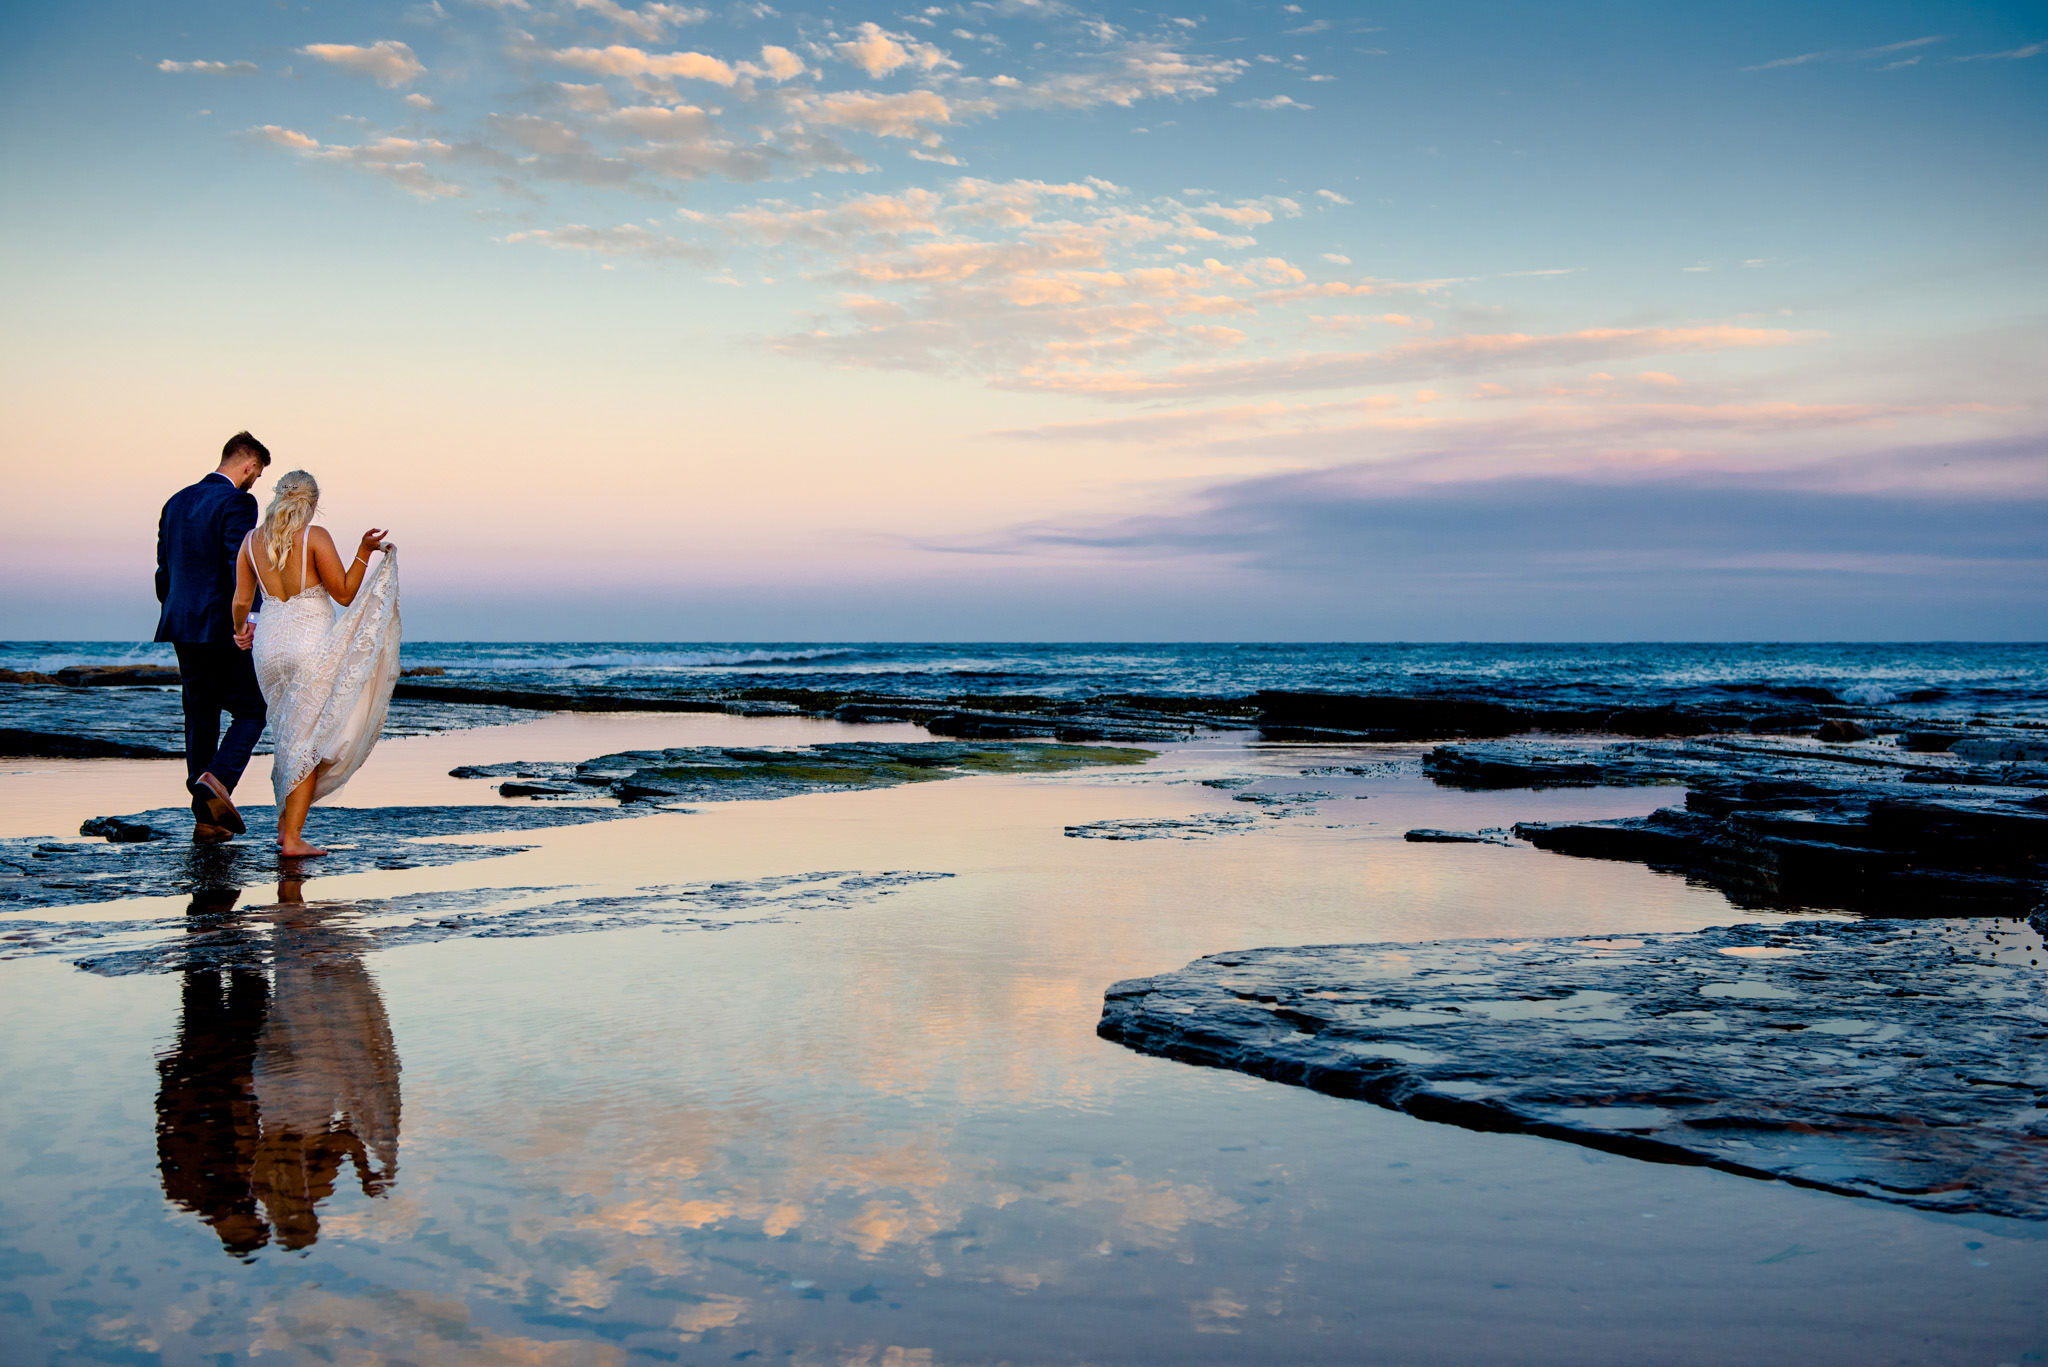 Reflection of bride and groom in water at Narrabeen beach